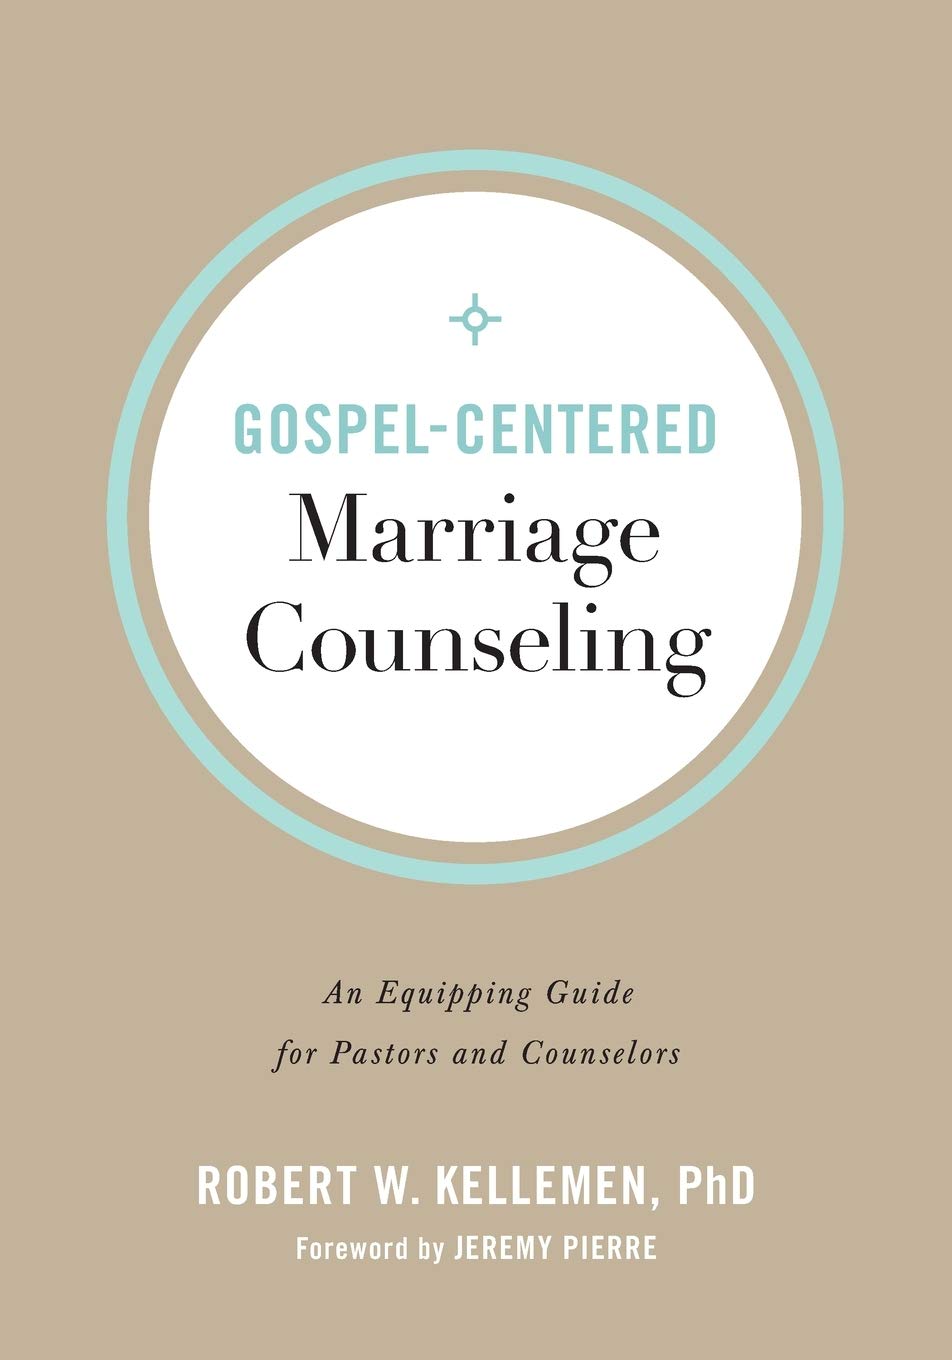 Biblical Counseling: What Is It and Why Is It Important? 2